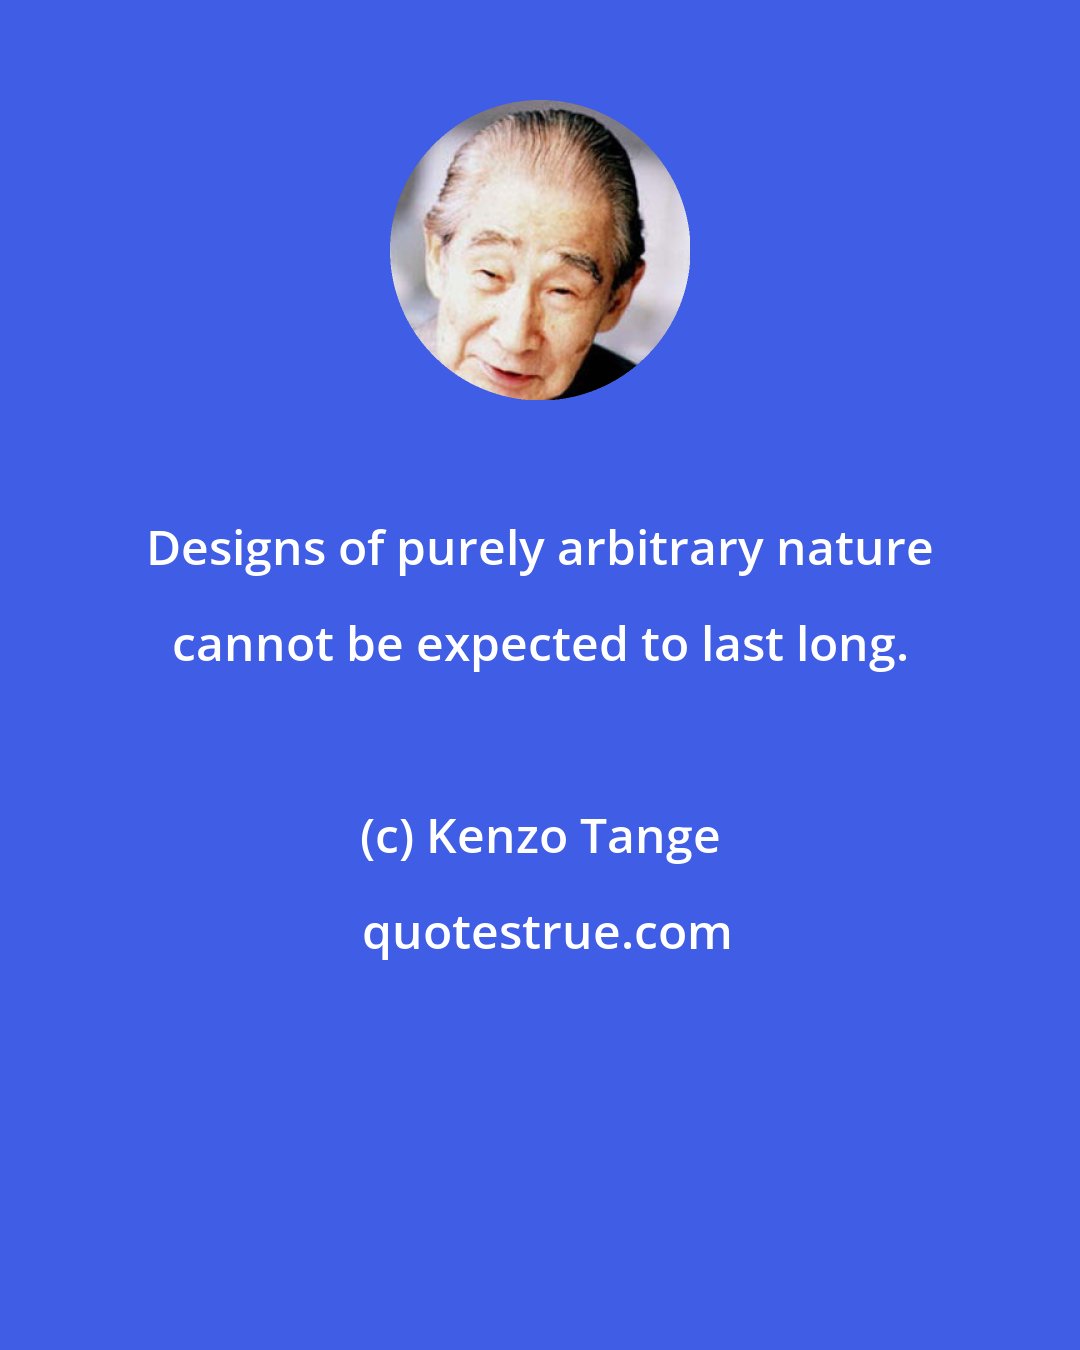 Kenzo Tange: Designs of purely arbitrary nature cannot be expected to last long.